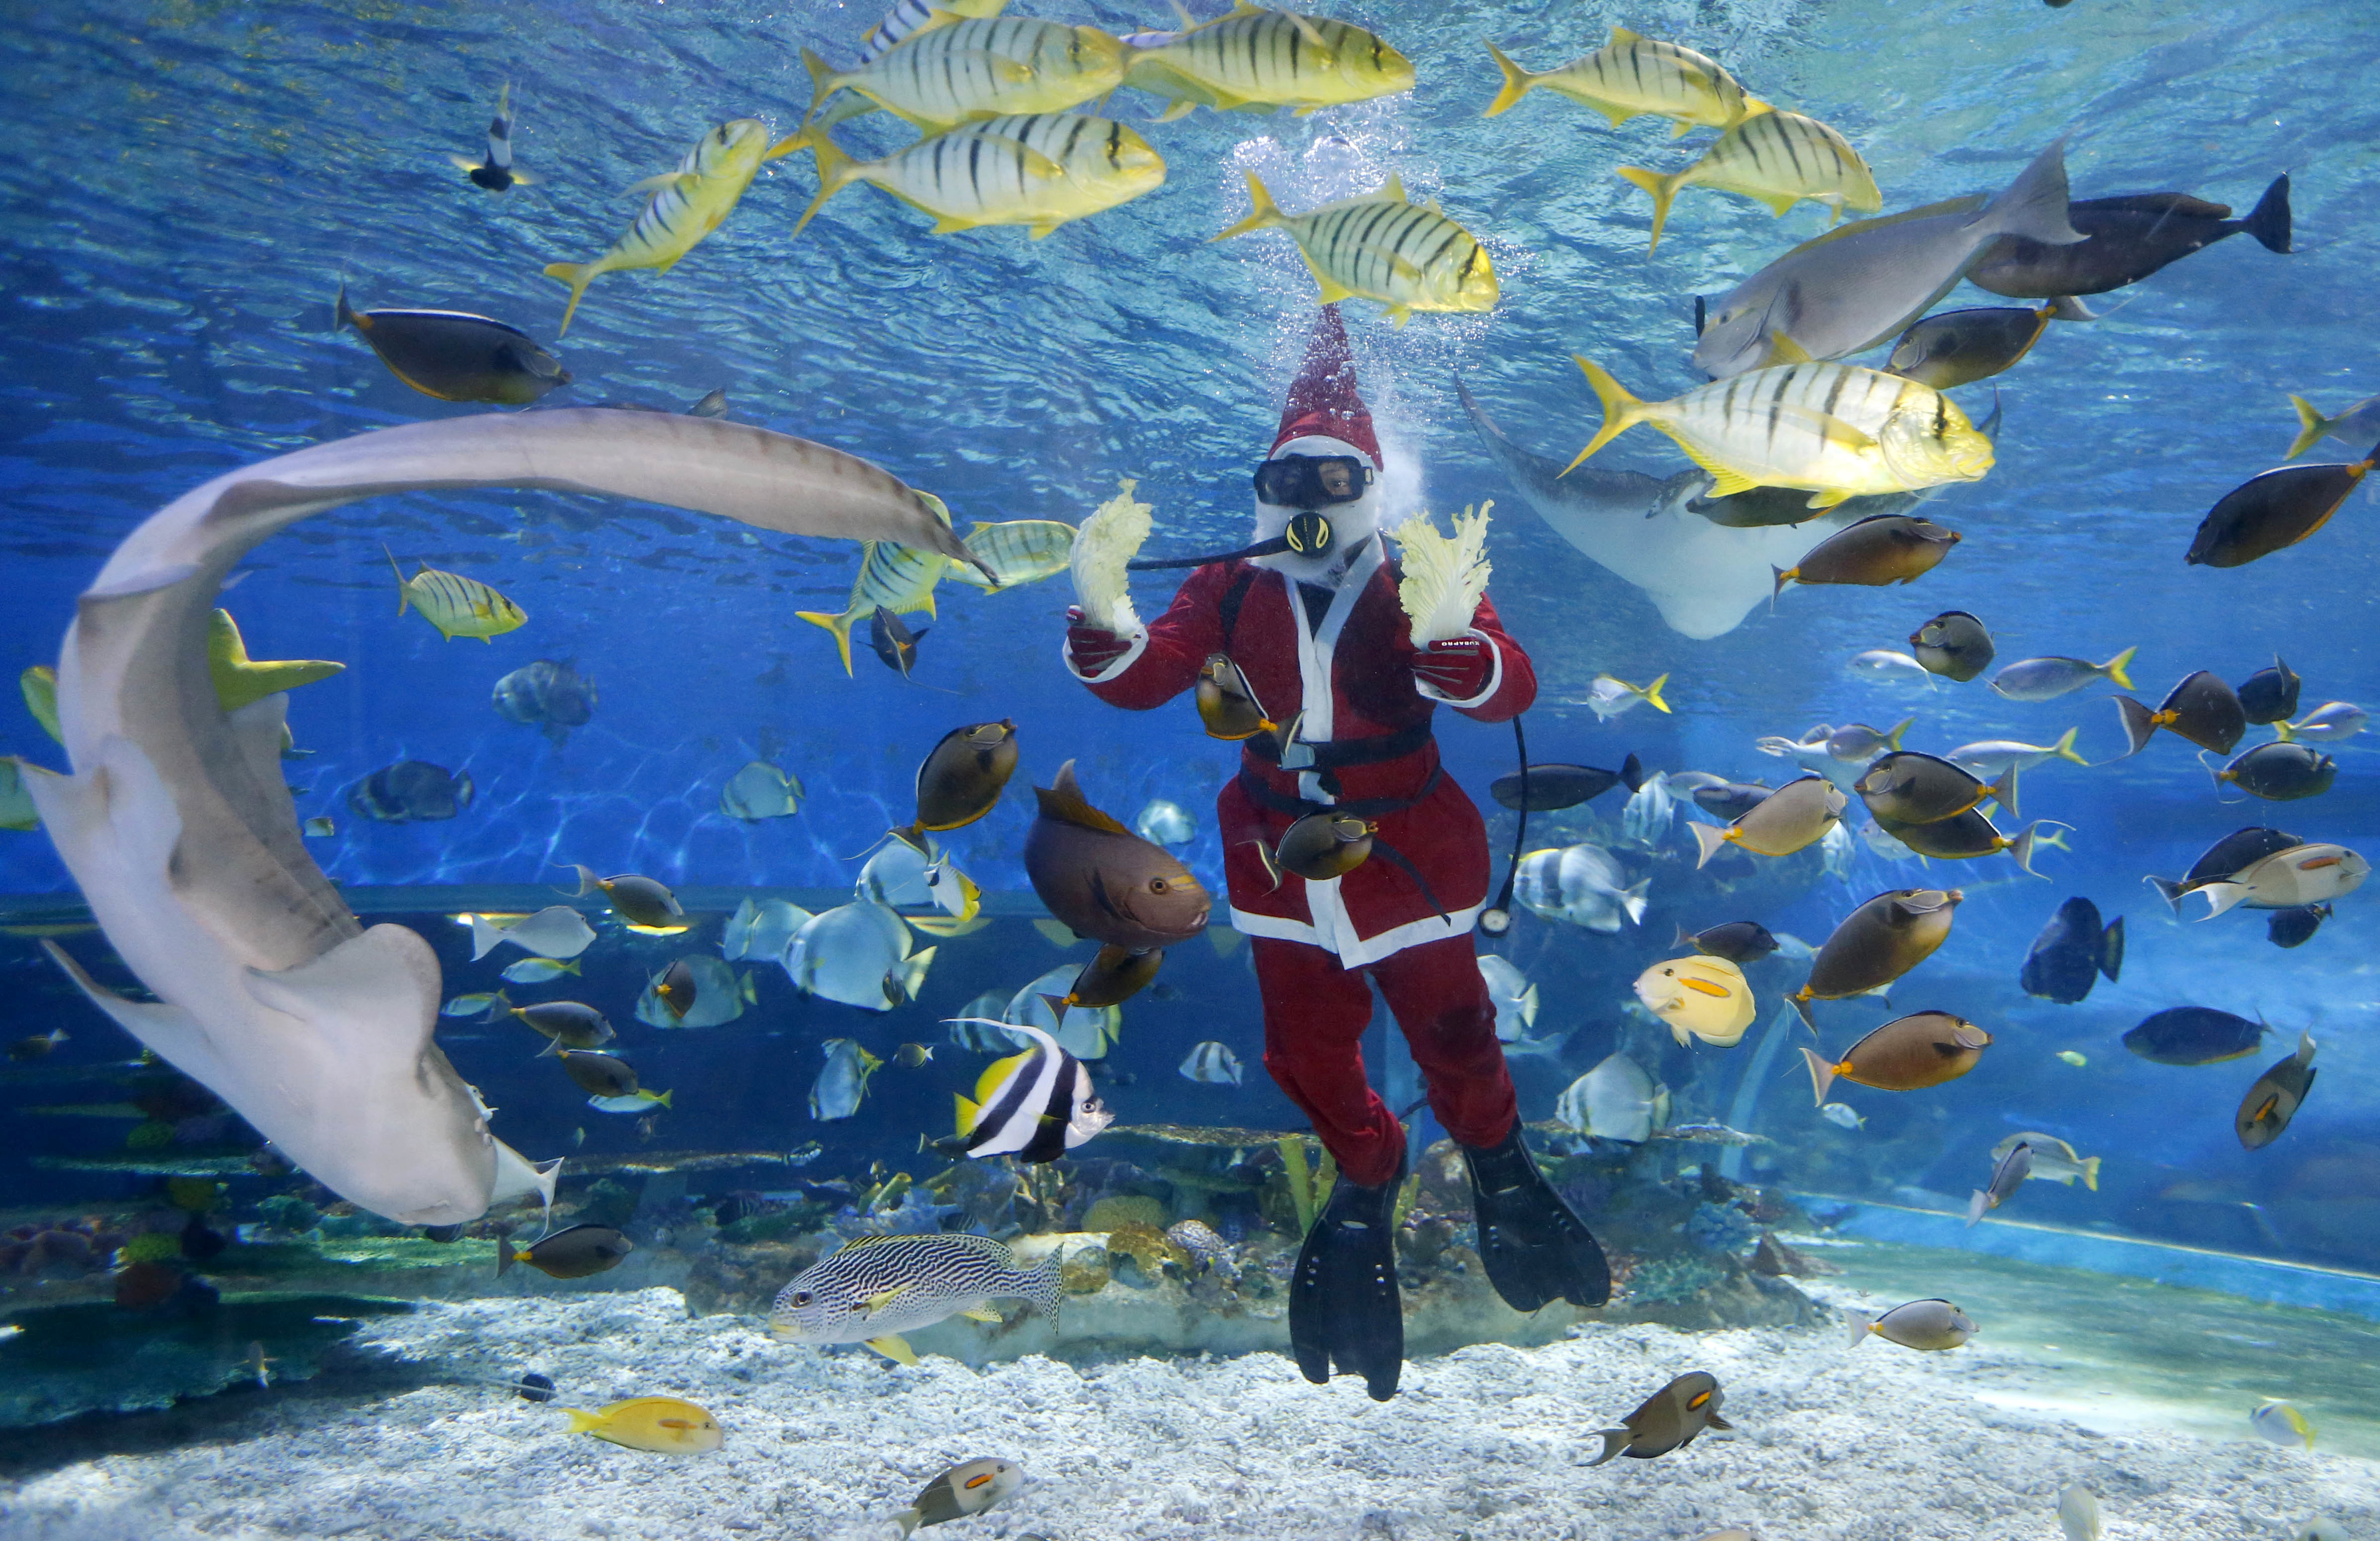 A diver dressed in a Santa costume, feeds grouper, stingrays, sharks and other fish at the Manila Ocean Park, the country's largest oceanarium, Friday, Dec. 15, 2017 in Manila, Philippines. With a few days left before Christmas, various malls and other business establishments come up with their own way of attracting patrons such as bazaars, Christmas displays and even free concerts. (AP Photo/Bullit Marquez)